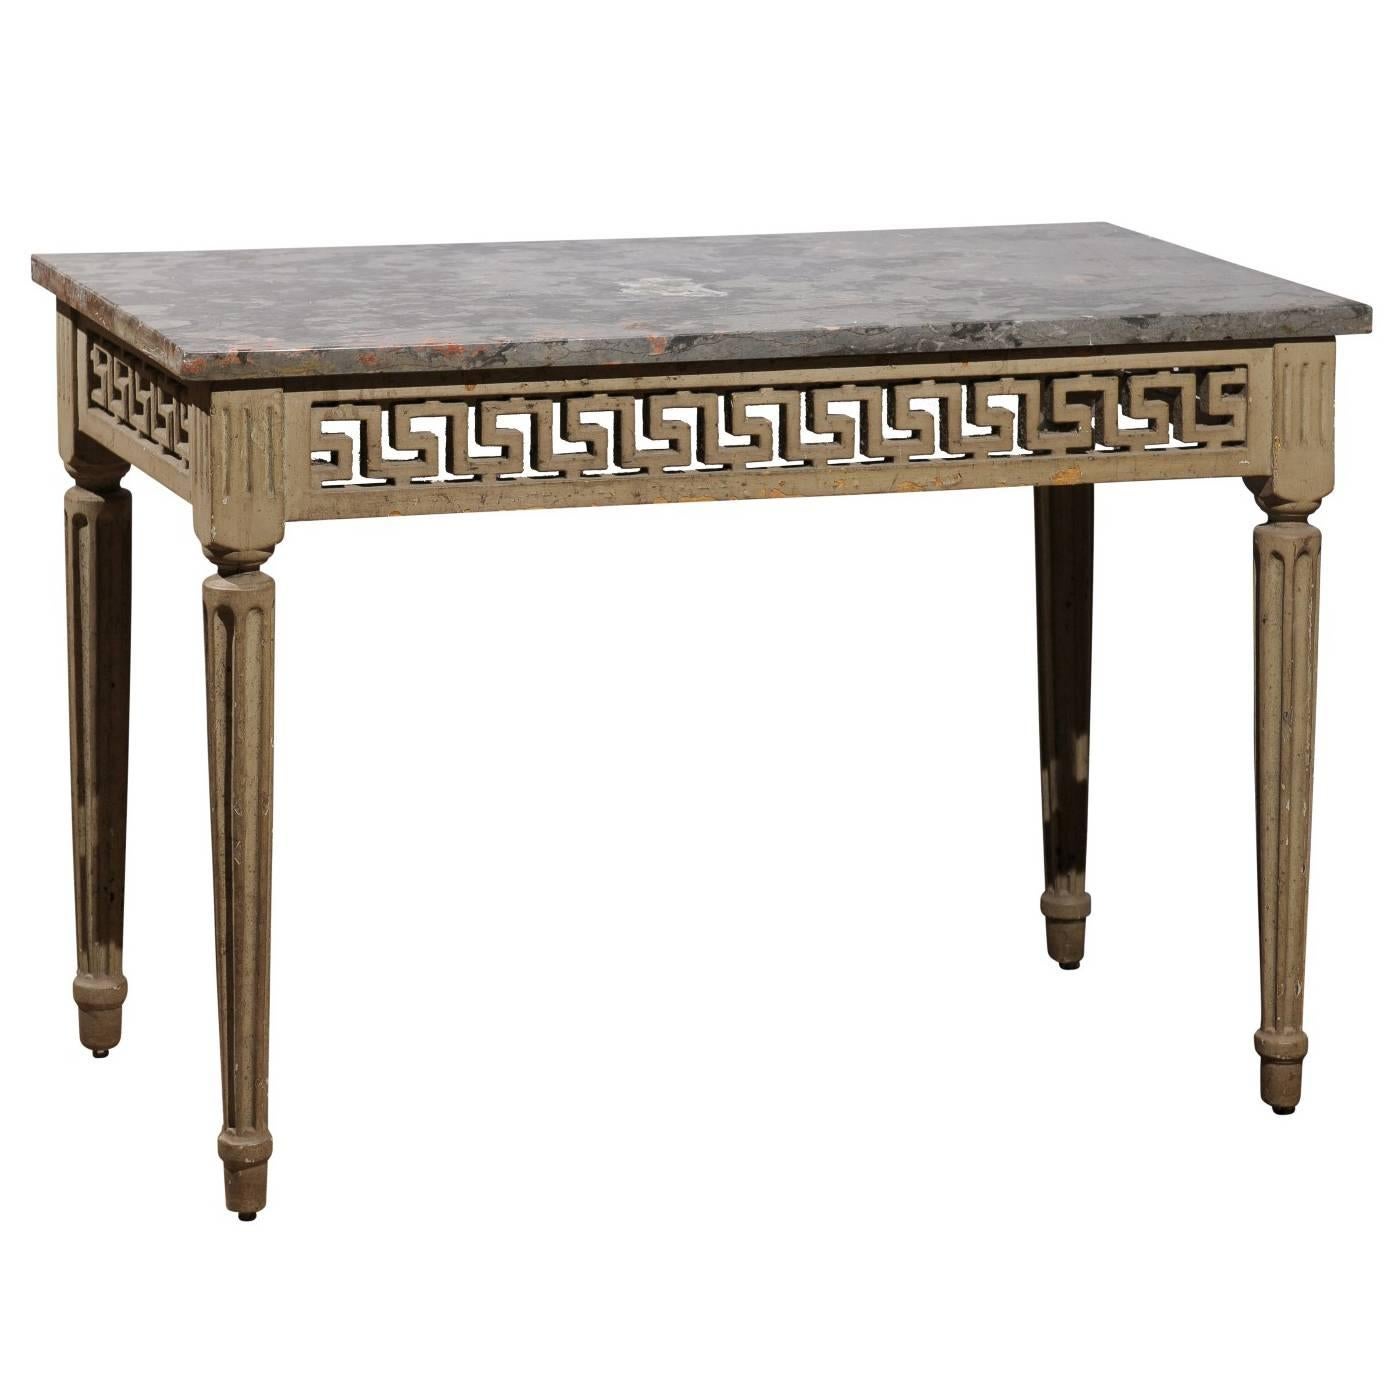 Late 18th Century Louis XVI Painted Console with Pierced Greek Key Frieze